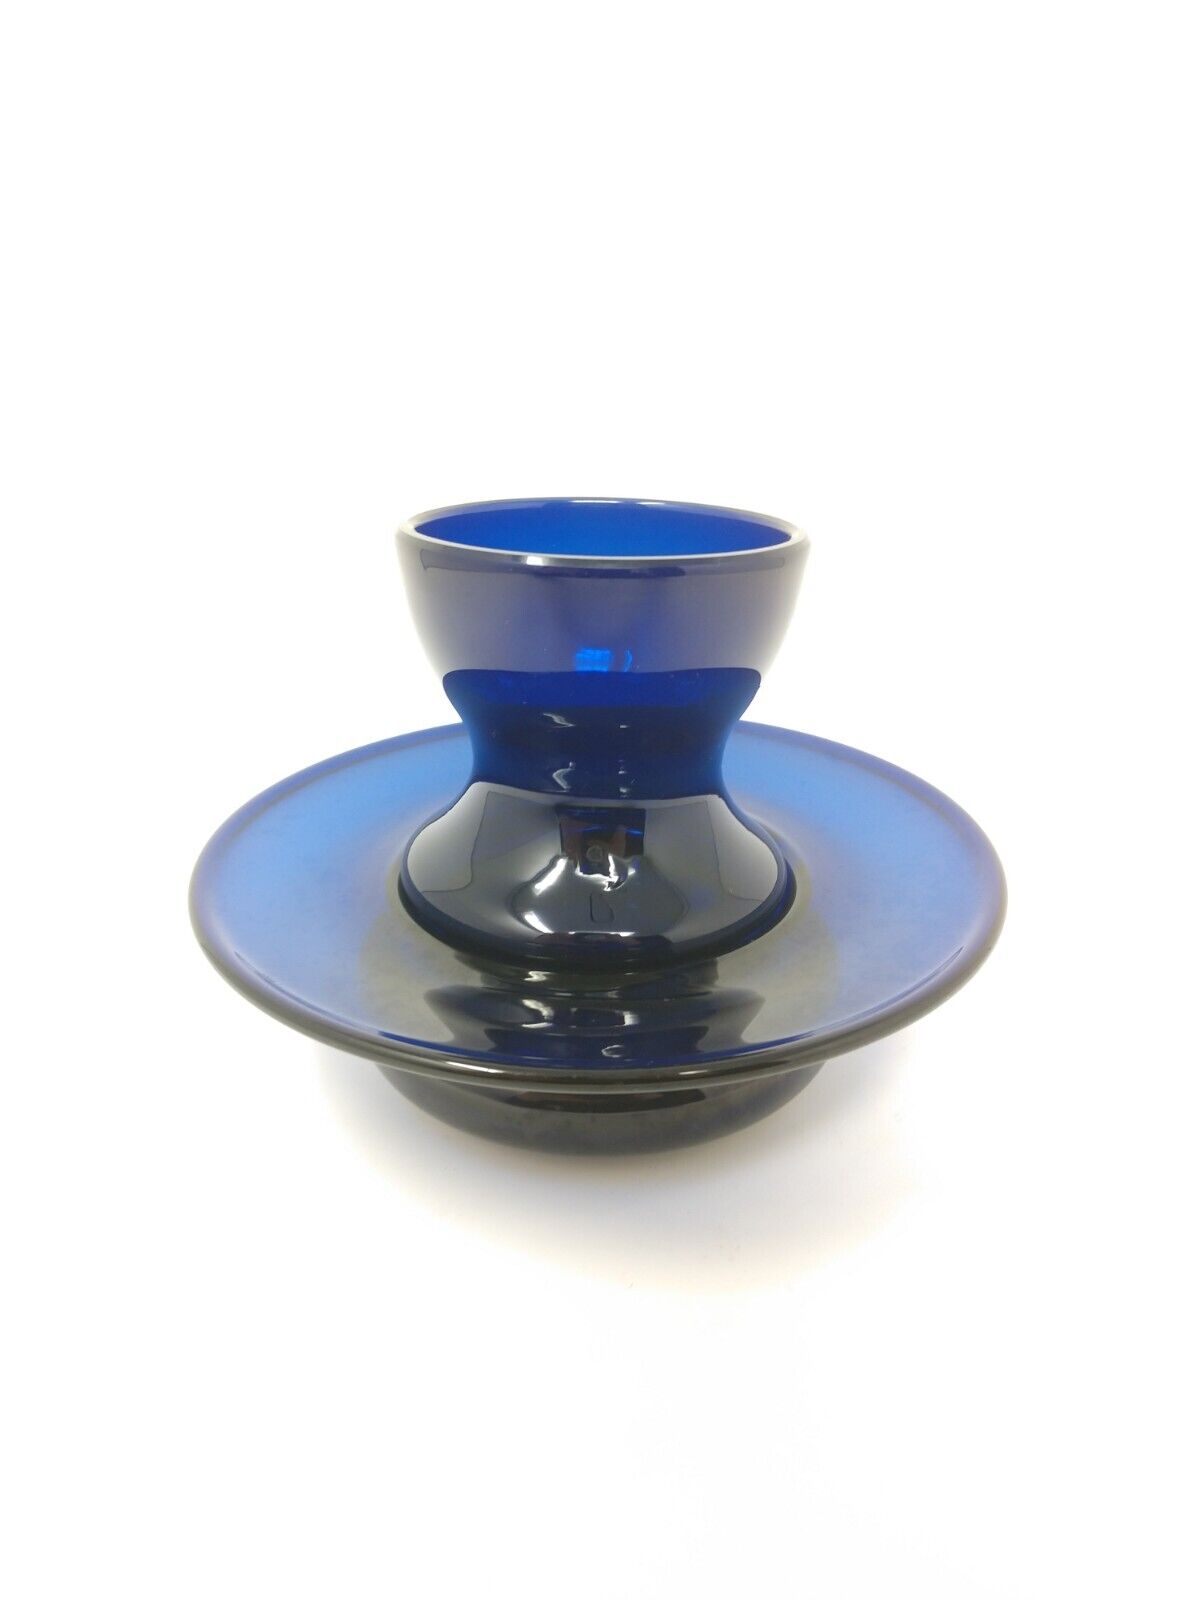 EXCEPTIONAL 19th c. Nesting Cup & Cuspidor Set FRENCH GLASS Spittoon Cobalt